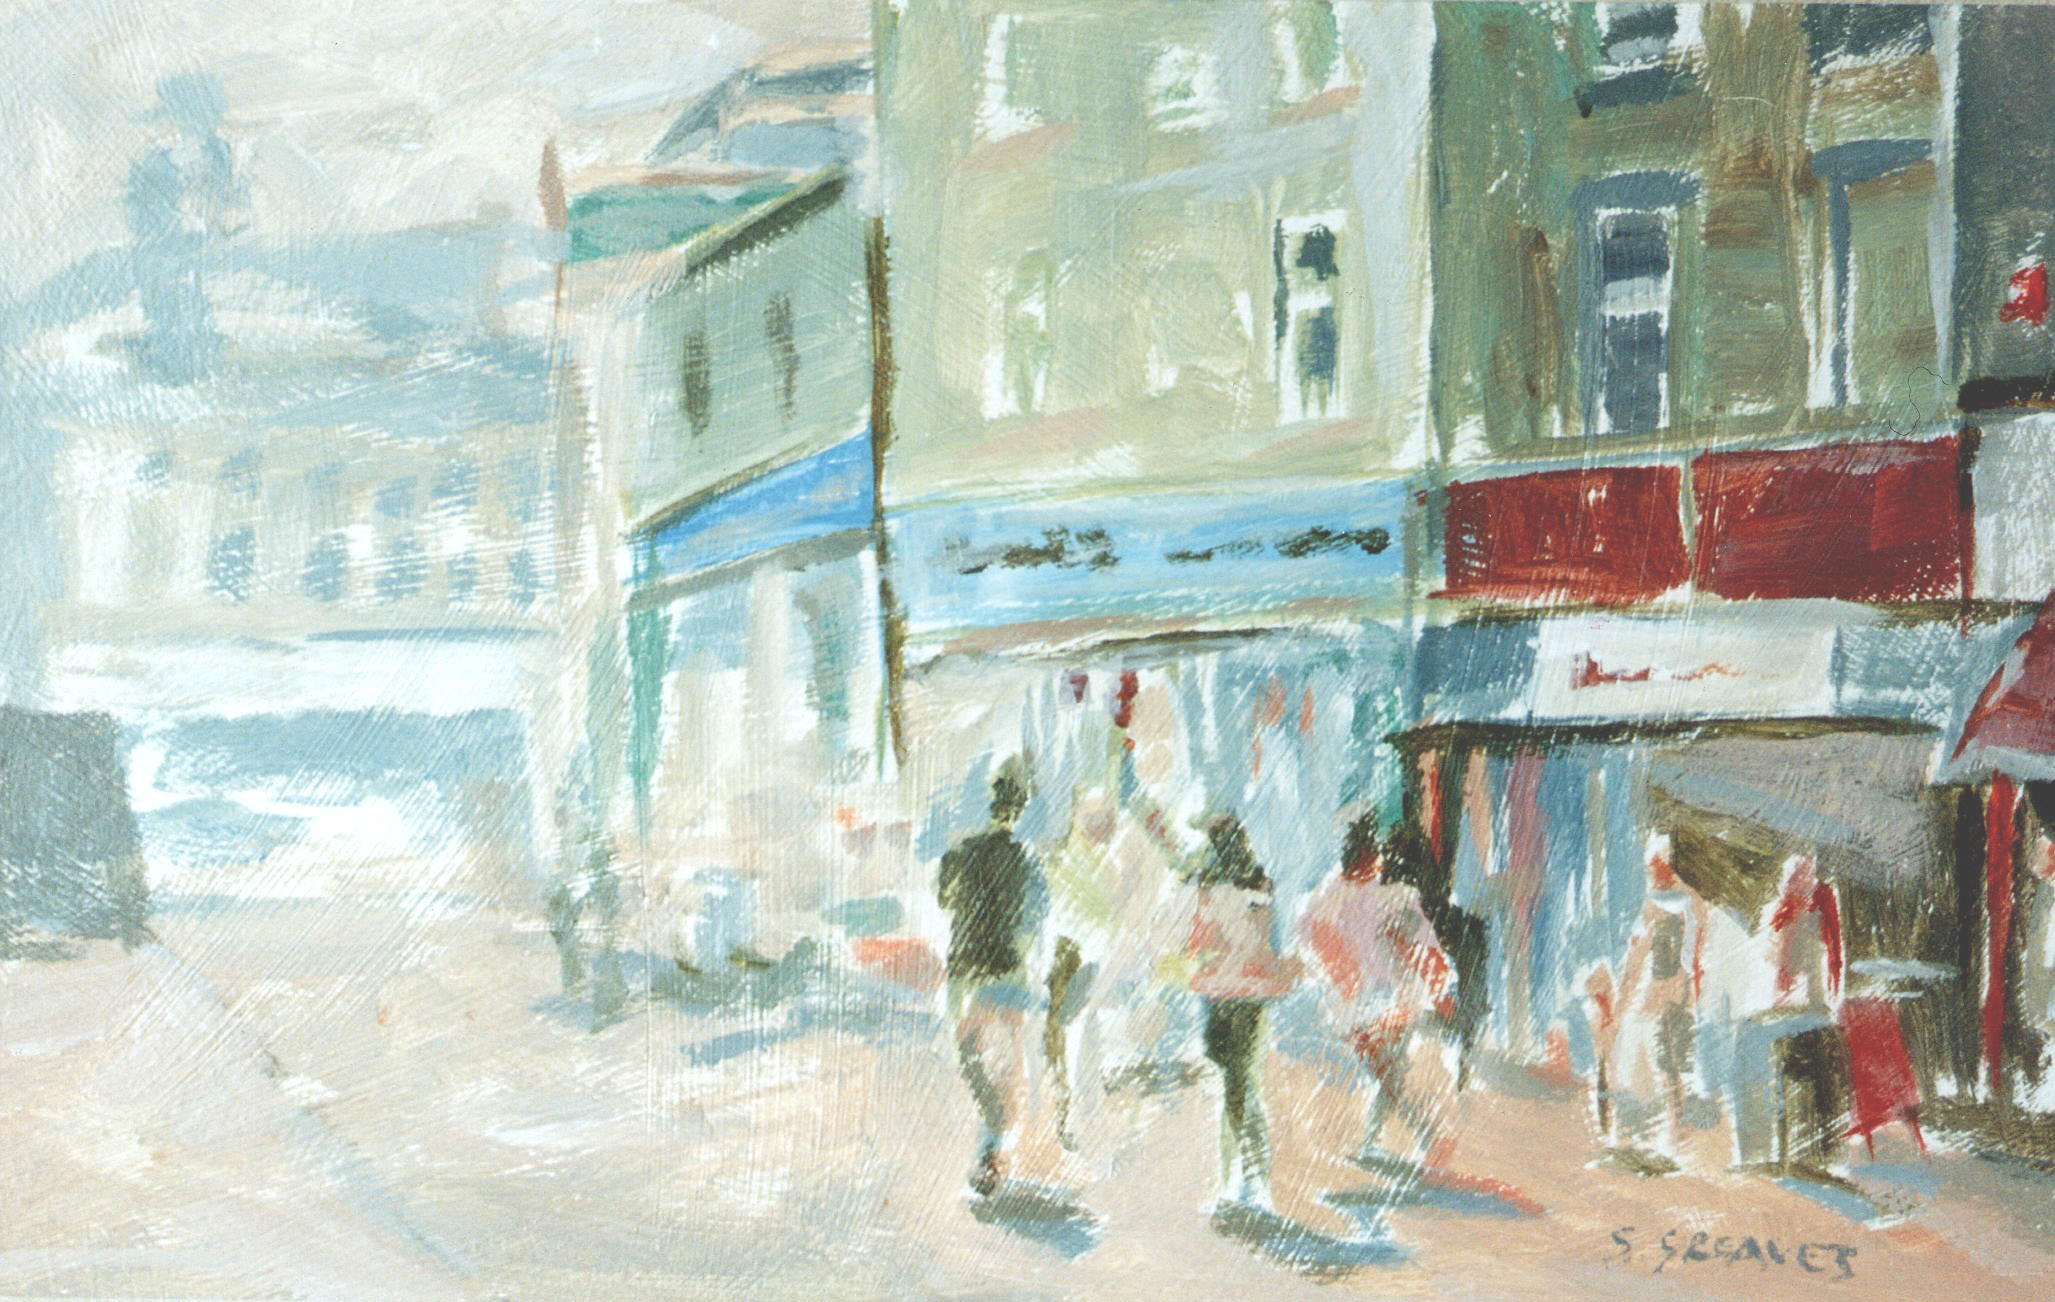 Steve Greaves - New Street, Barnsley - landscape painting in acrylic